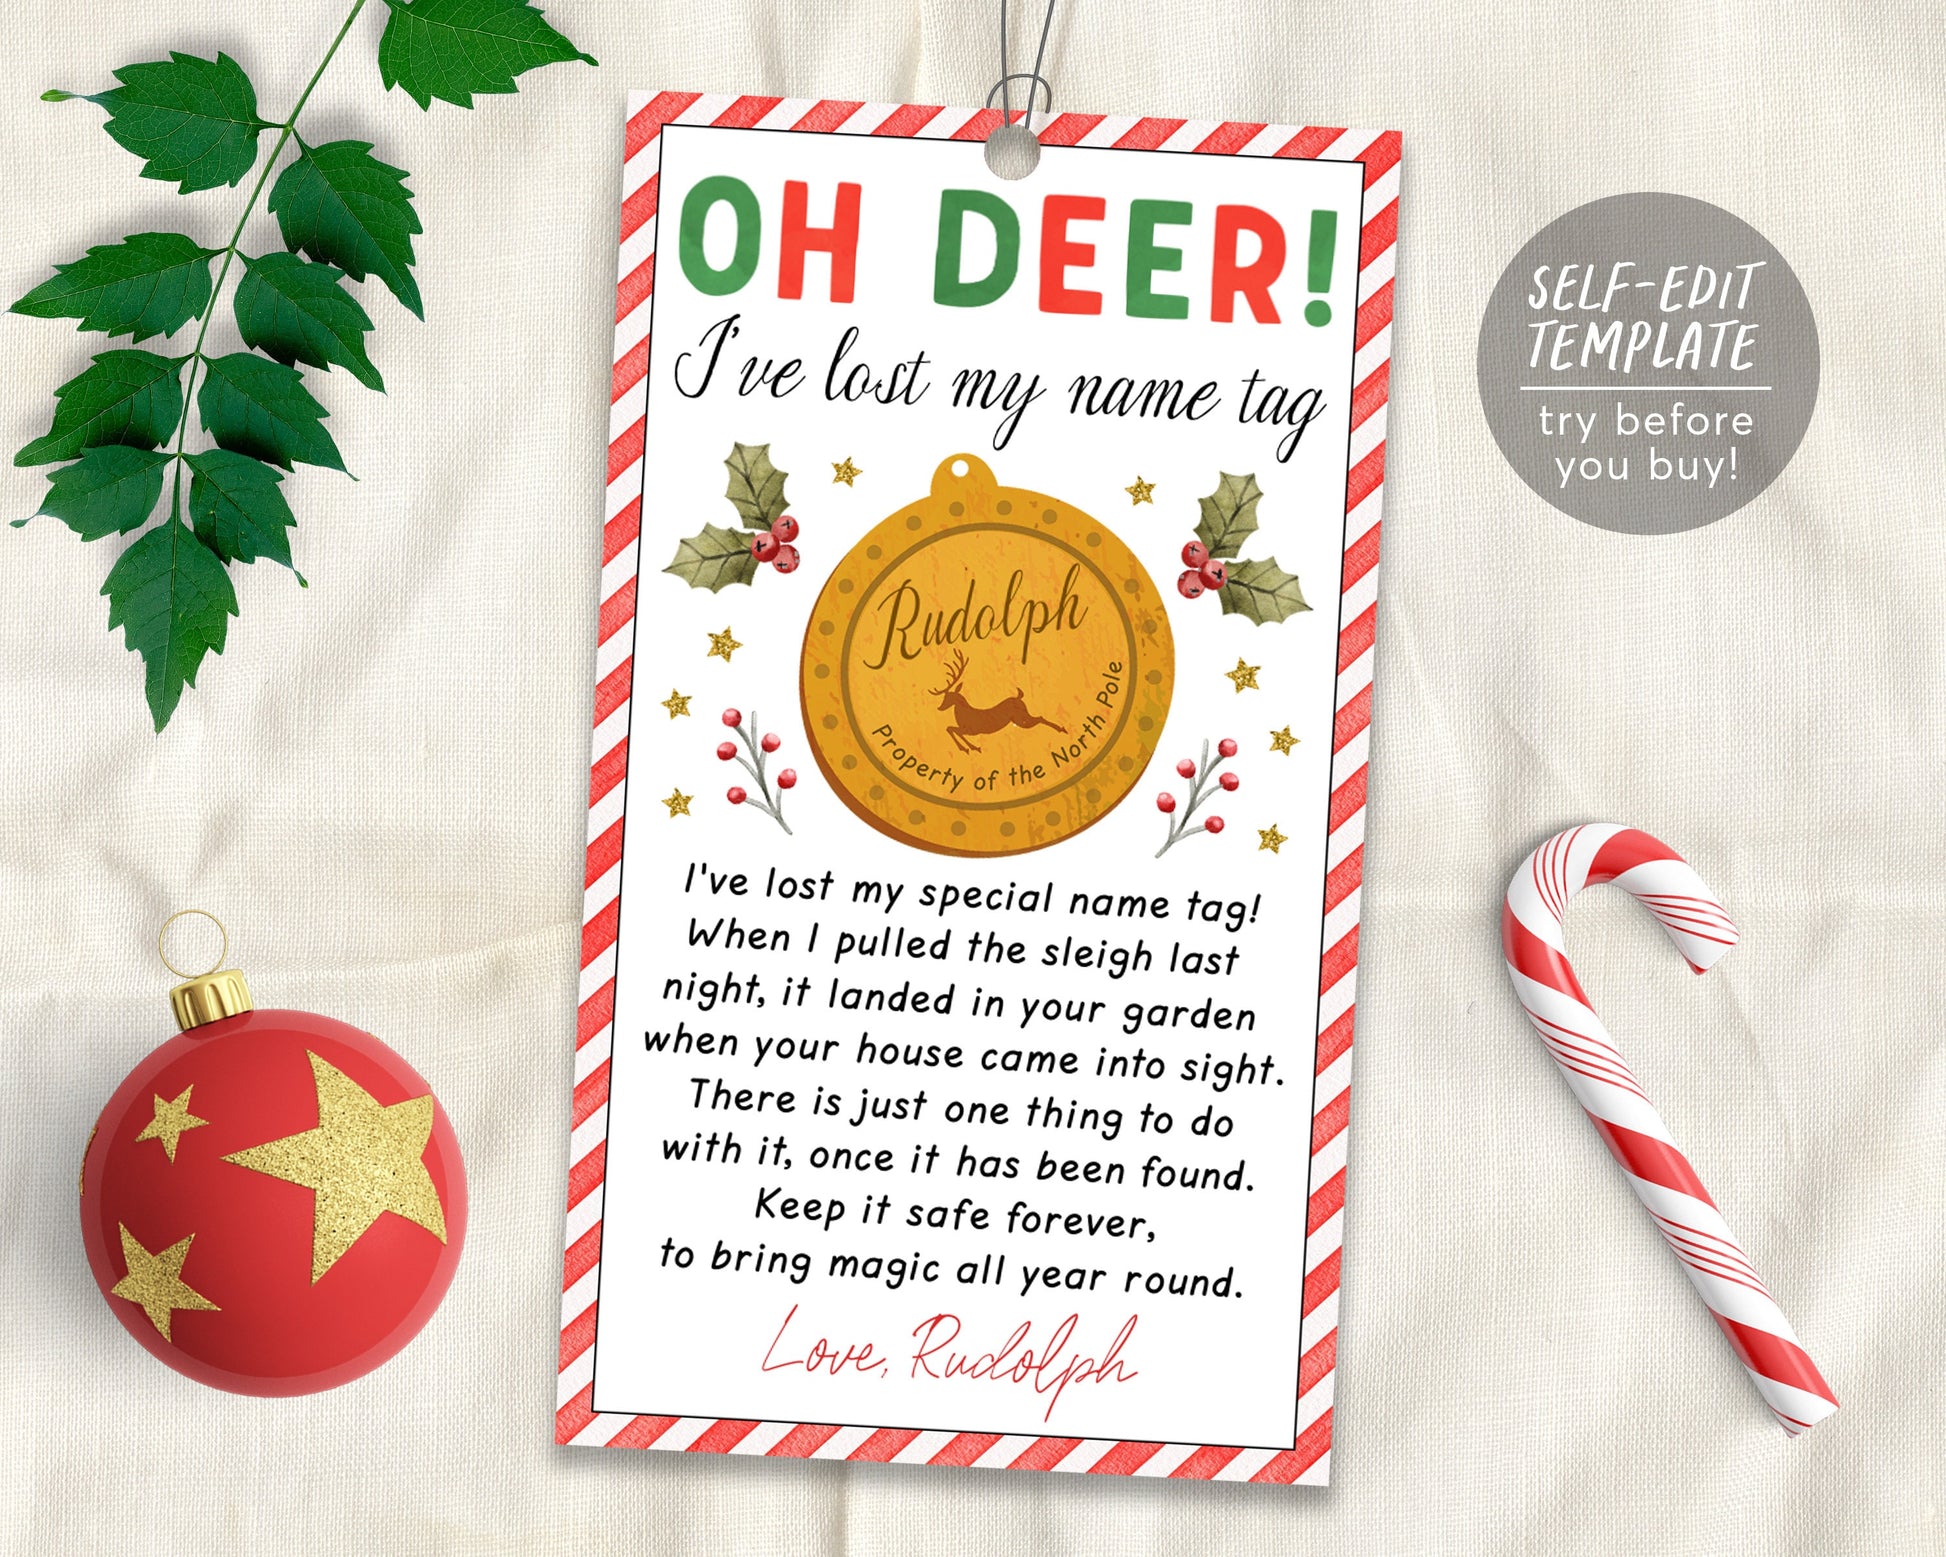 Printable Red-Nosed Reindeer Holiday Gift Tags (Instant Download)